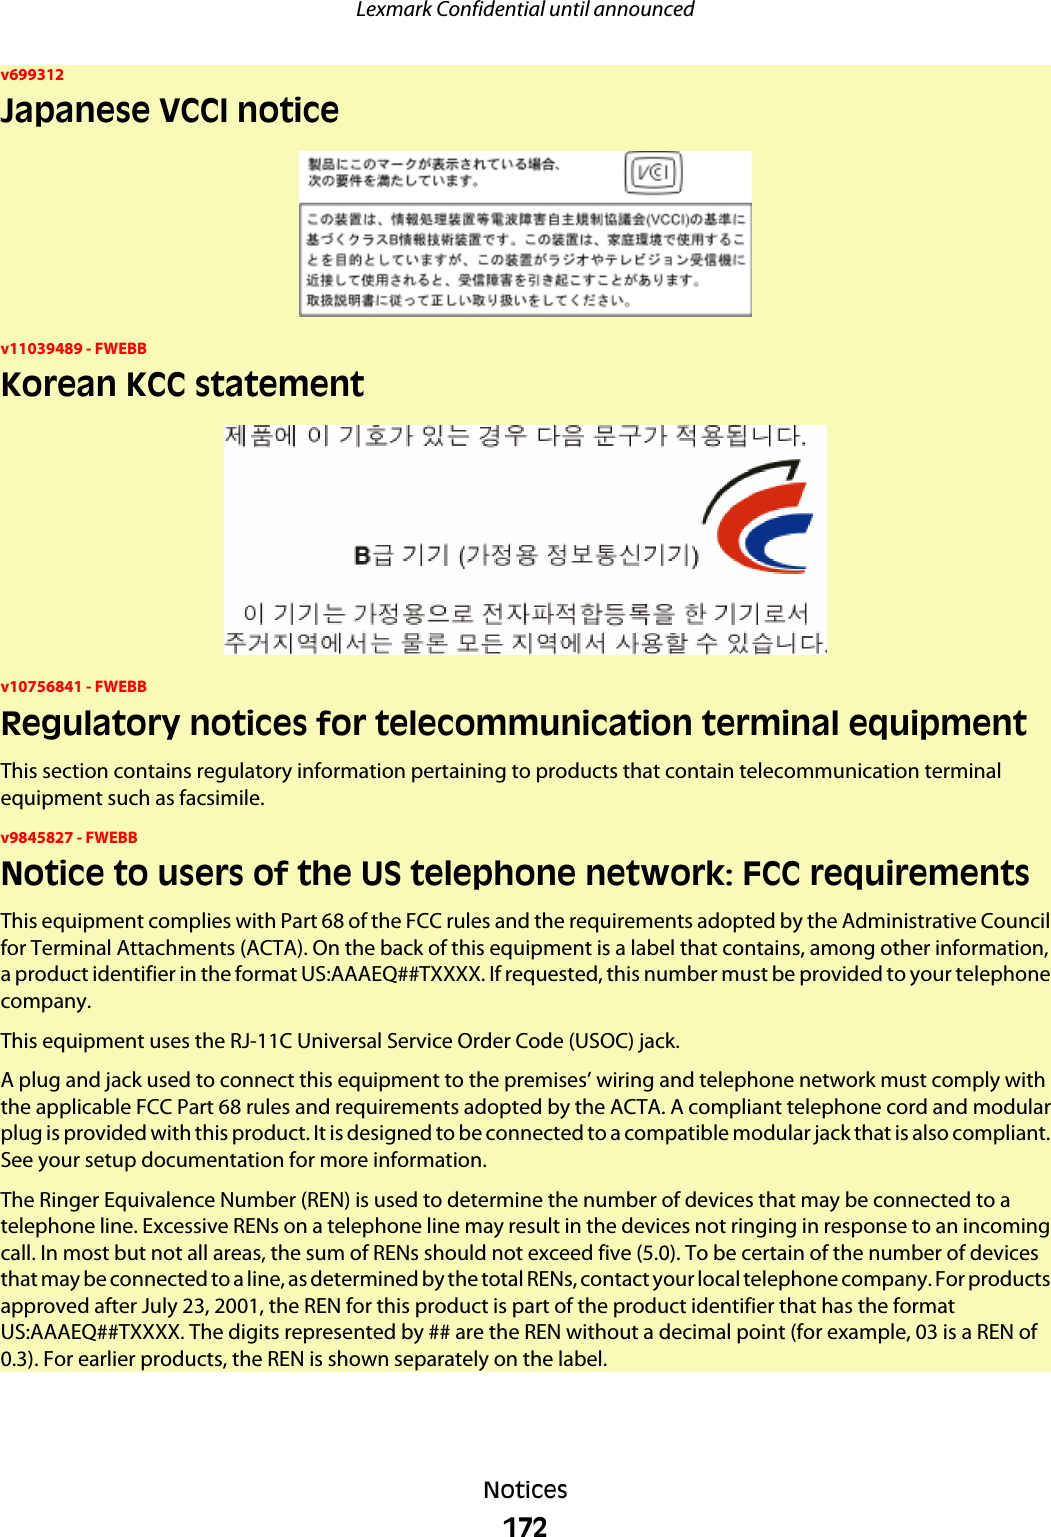 v699312Japanese VCCI noticev11039489 - FWEBBKorean KCC statementv10756841 - FWEBBRegulatory notices for telecommunication terminal equipmentThis section contains regulatory information pertaining to products that contain telecommunication terminalequipment such as facsimile.v9845827 - FWEBBNotice to users of the US telephone network: FCC requirementsThis equipment complies with Part 68 of the FCC rules and the requirements adopted by the Administrative Councilfor Terminal Attachments (ACTA). On the back of this equipment is a label that contains, among other information,a product identifier in the format US:AAAEQ##TXXXX. If requested, this number must be provided to your telephonecompany.This equipment uses the RJ-11C Universal Service Order Code (USOC) jack.A plug and jack used to connect this equipment to the premises’ wiring and telephone network must comply withthe applicable FCC Part 68 rules and requirements adopted by the ACTA. A compliant telephone cord and modularplug is provided with this product. It is designed to be connected to a compatible modular jack that is also compliant.See your setup documentation for more information.The Ringer Equivalence Number (REN) is used to determine the number of devices that may be connected to atelephone line. Excessive RENs on a telephone line may result in the devices not ringing in response to an incomingcall. In most but not all areas, the sum of RENs should not exceed five (5.0). To be certain of the number of devicesthat may be connected to a line, as determined by the total RENs, contact your local telephone company. For productsapproved after July 23, 2001, the REN for this product is part of the product identifier that has the formatUS:AAAEQ##TXXXX. The digits represented by ## are the REN without a decimal point (for example, 03 is a REN of0.3). For earlier products, the REN is shown separately on the label.Lexmark Confidential until announcedNotices172